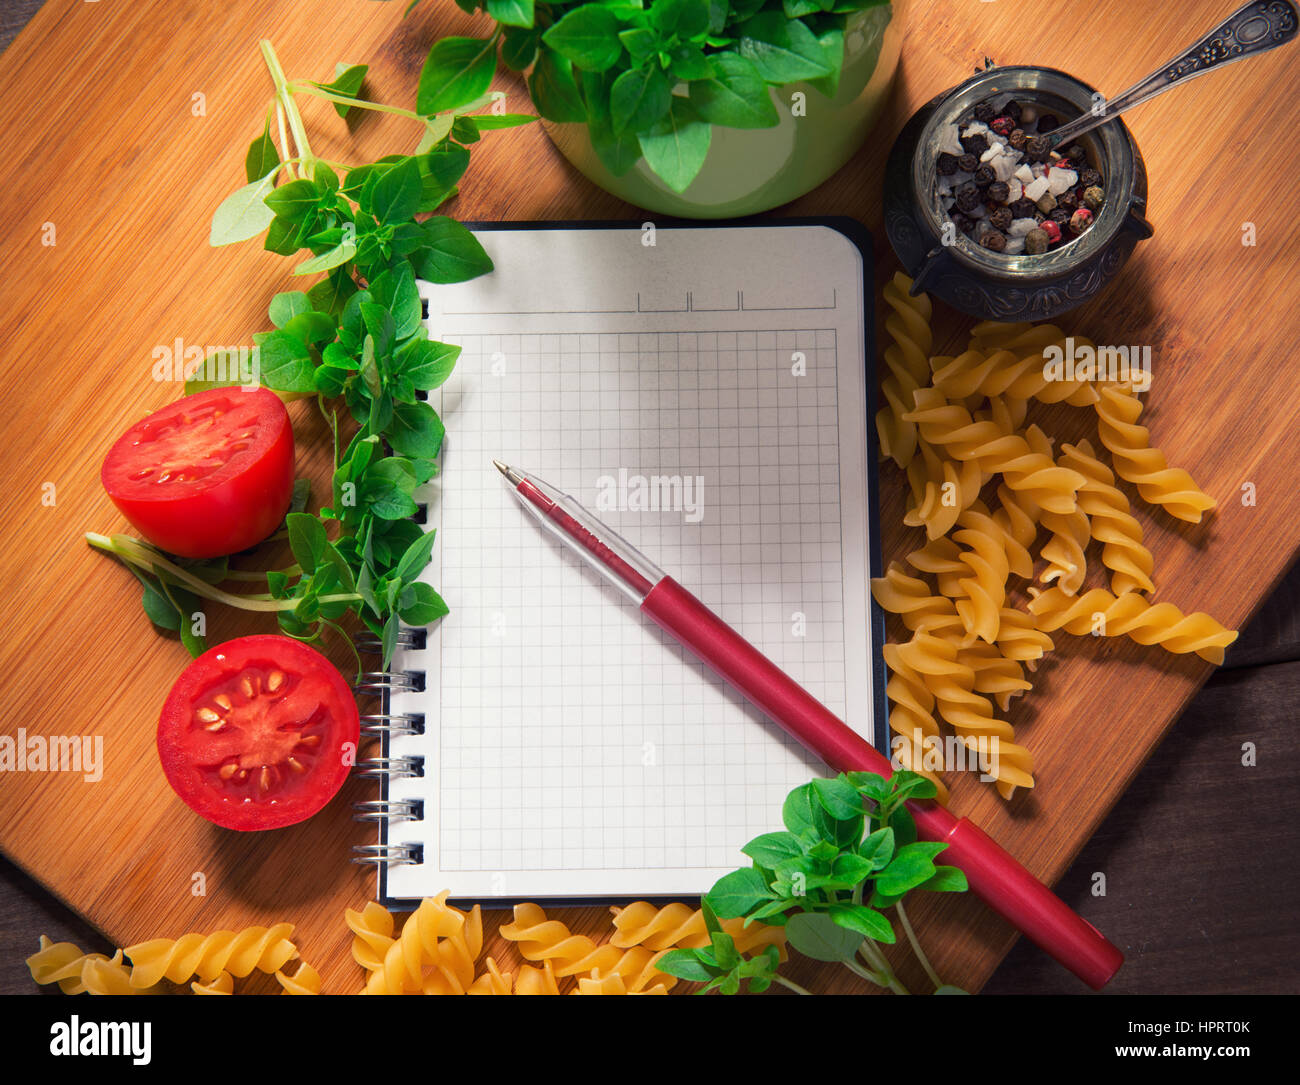 Top view of an empty recipe book surrounded of food ingredients Stock Photo